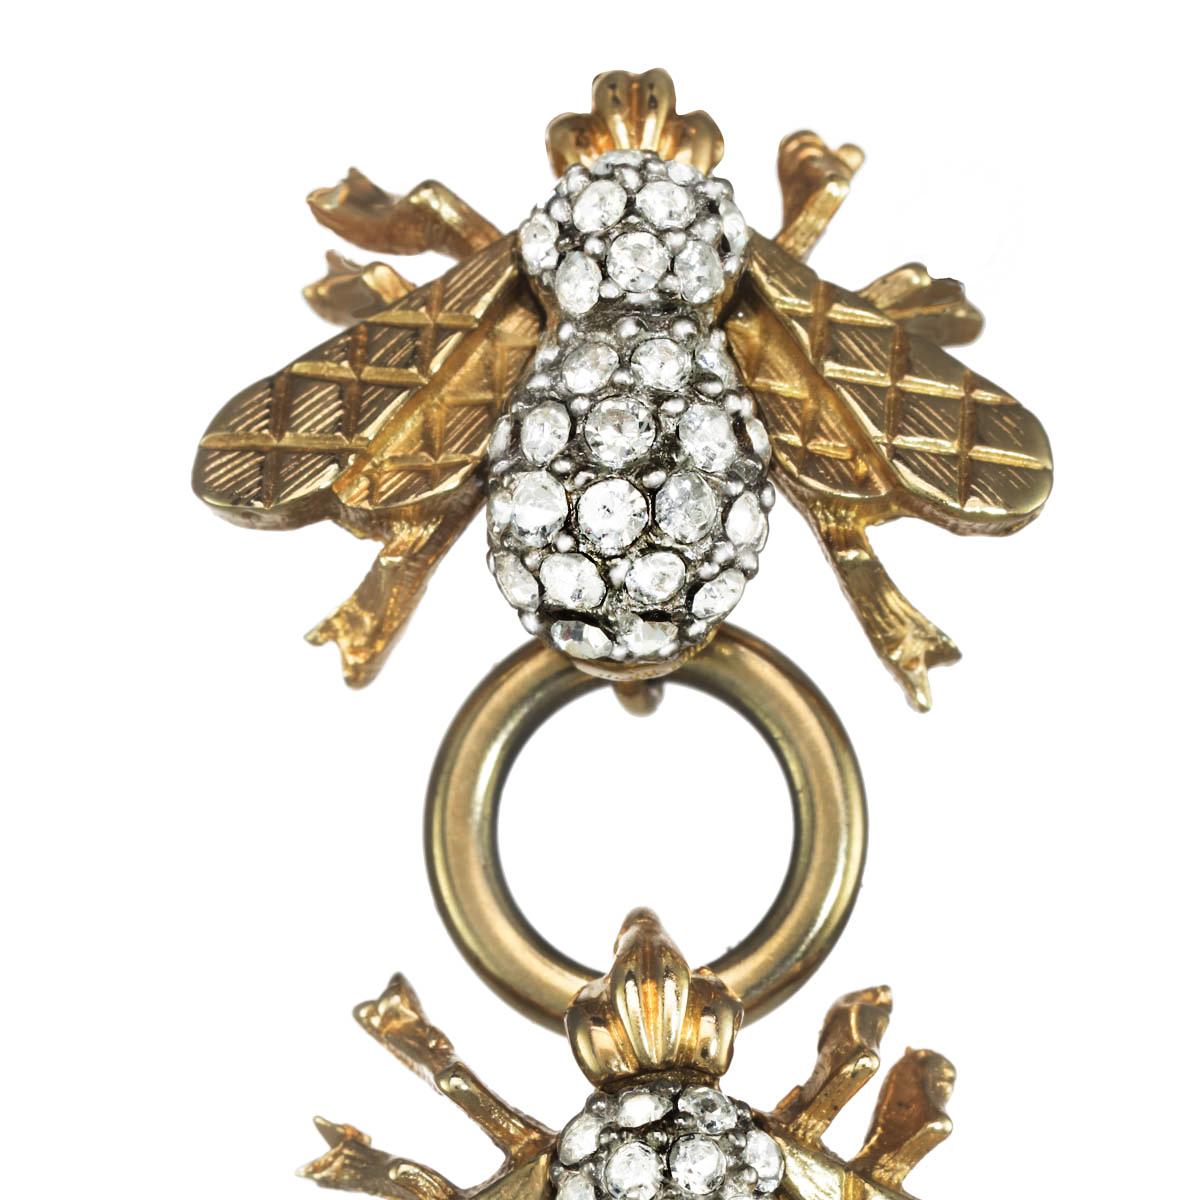 Three CINER heritage bees, with polished gold connectors, encompasses this gorgeous linear statement earring. With beautifully detailed gold quilted wings and illuminating Swarovski crystal rhinestone accents, these earrings are Carolyne's take on